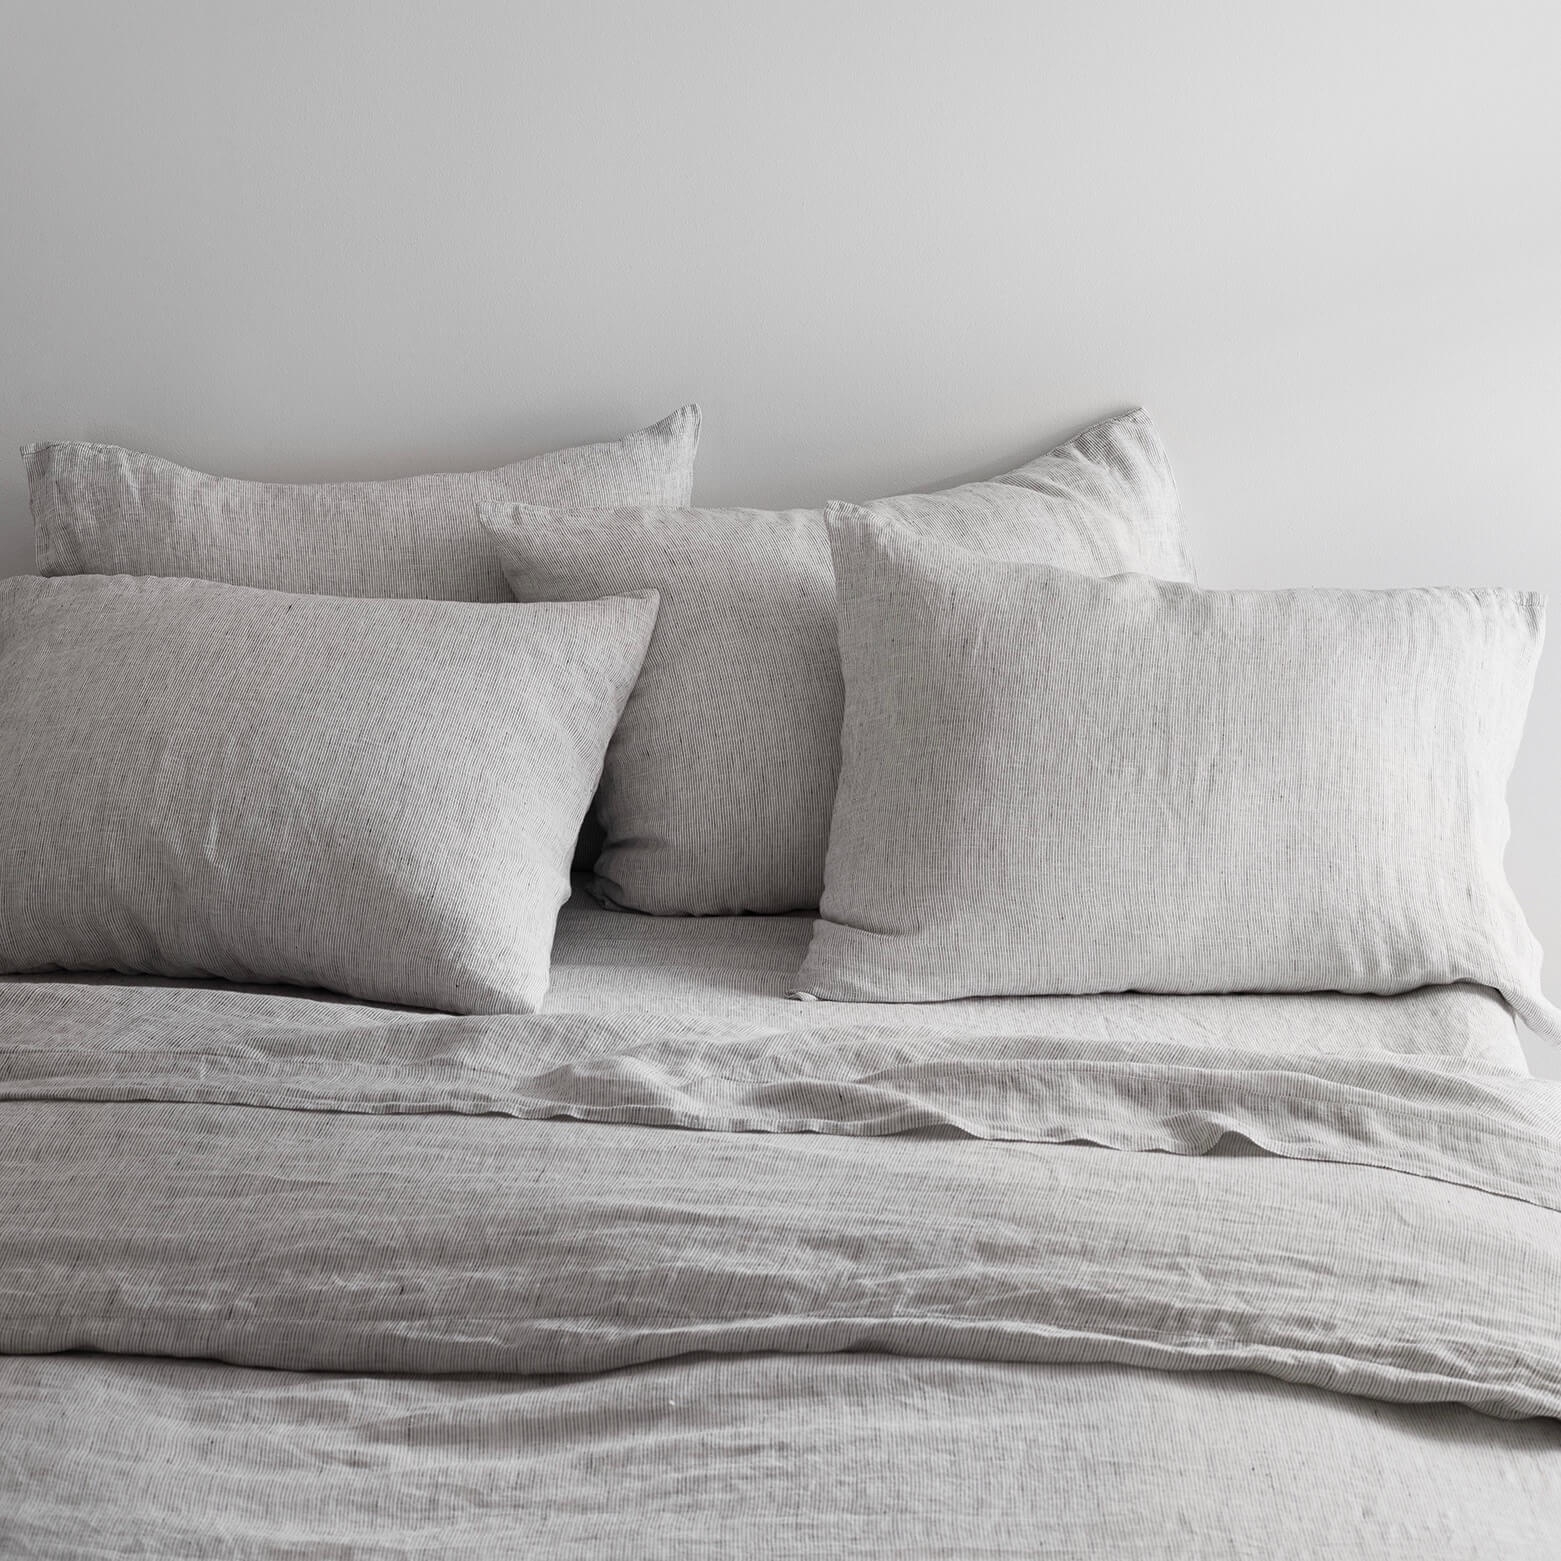 The Citizenry Stonewashed Linen Duvet Cover | King/Cal King | Duvet Only | Solid Sand - Image 3